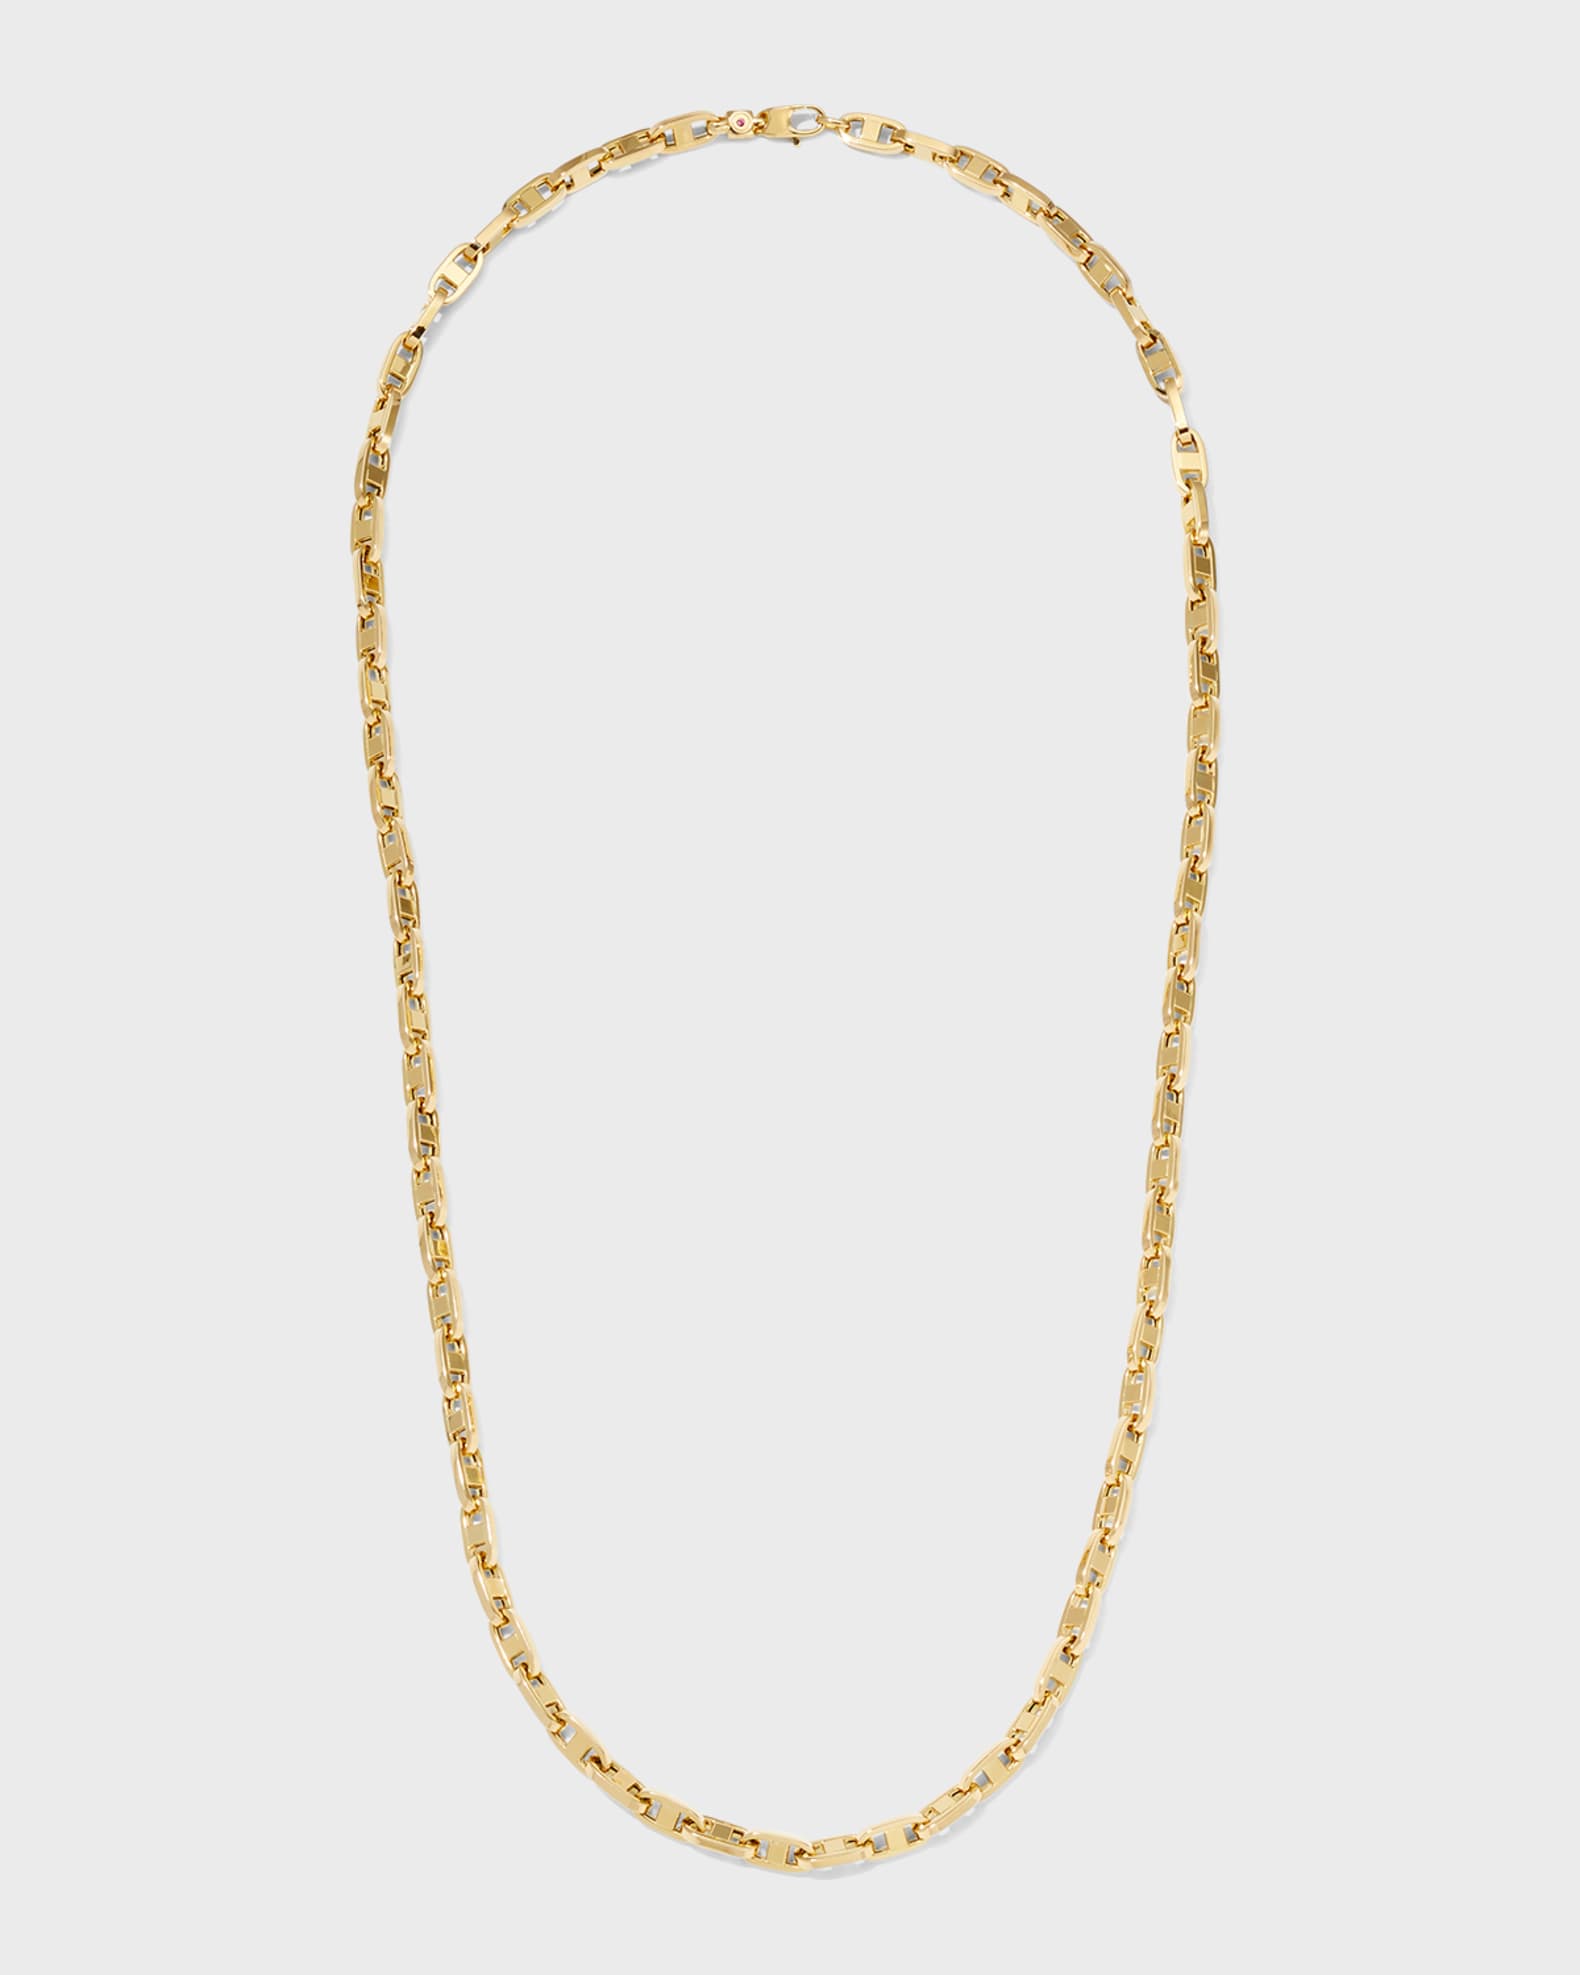 Roberto Coin Yellow Gold Chain Necklace, 24